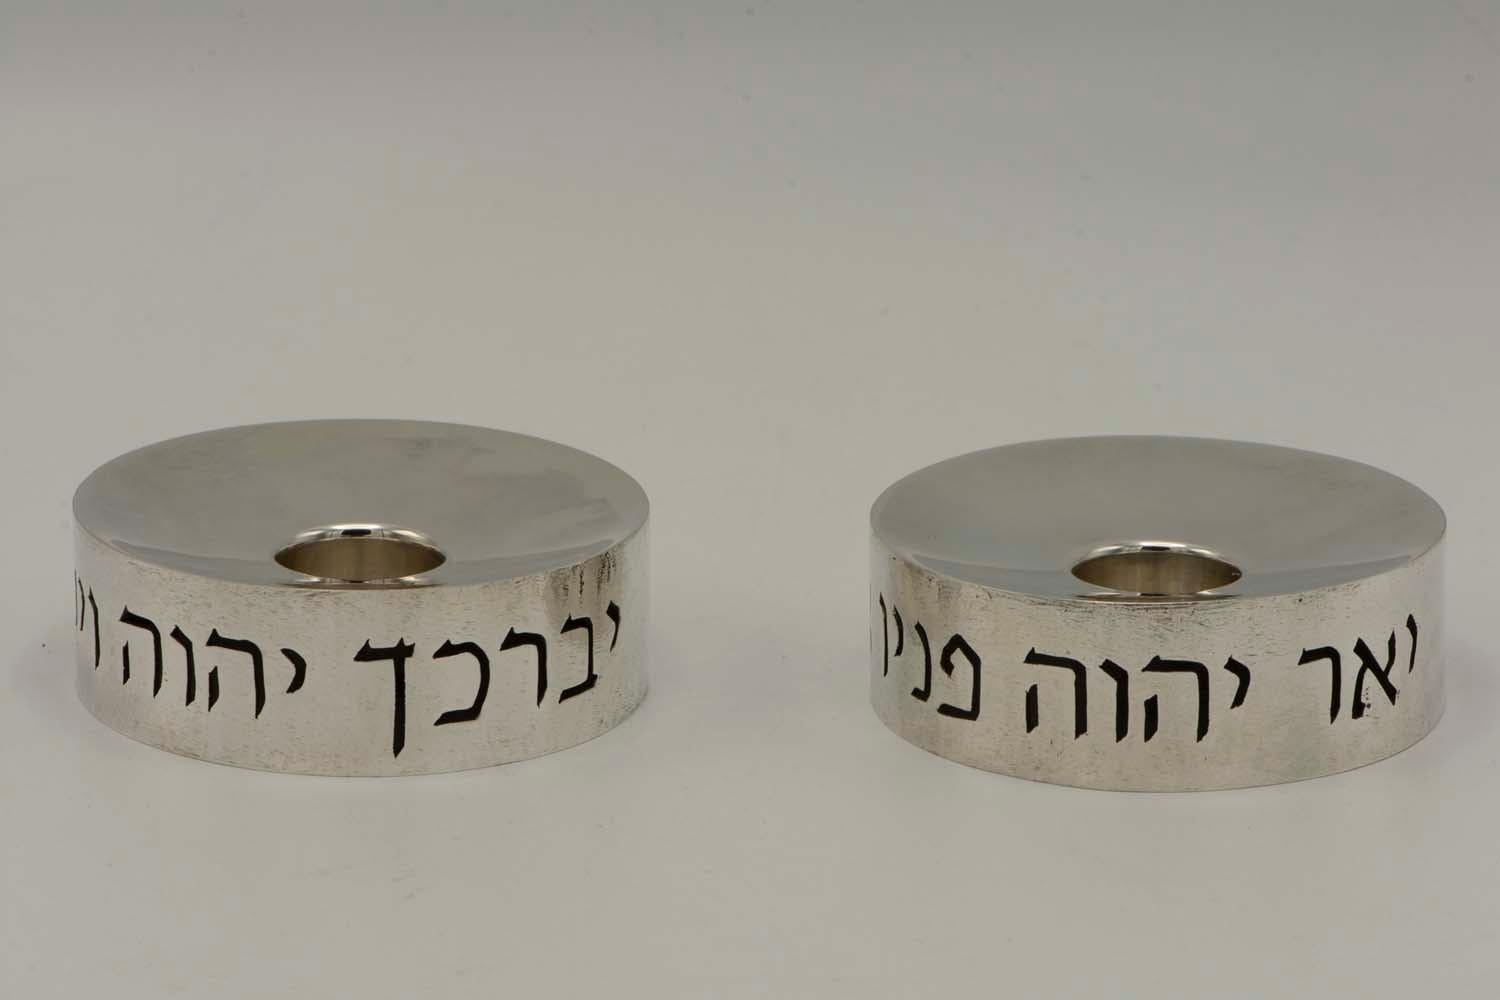 Sterling silver Shabbat candlesticks, London, England, 2002.
Unique and modern design. Cut out letters in Hebrew on each candlestick, one candlestick inscribed:
